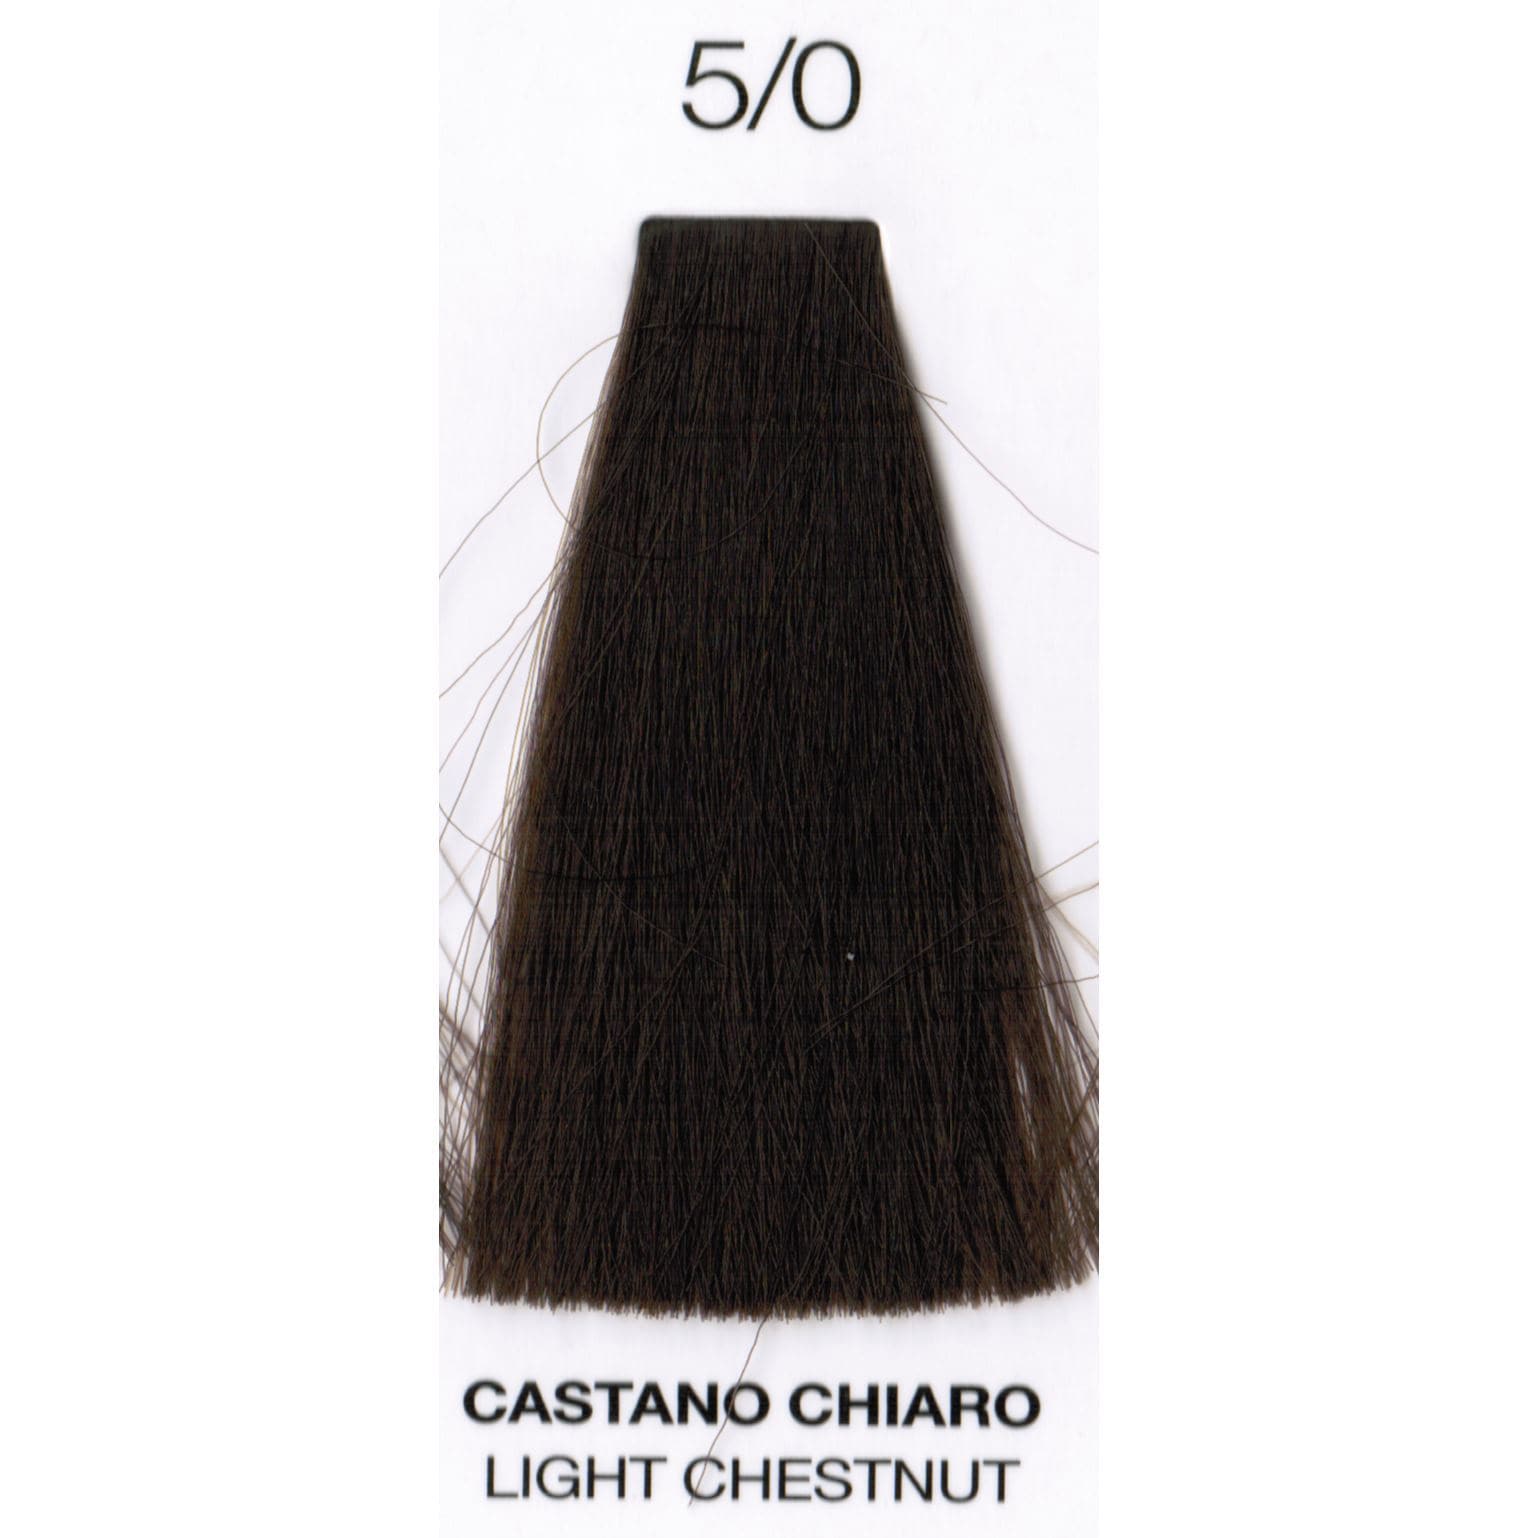 5/0 Light Chestnut | Purity | Ammonia-Free Permanent Hair Color HAIR COLOR OYSTER 